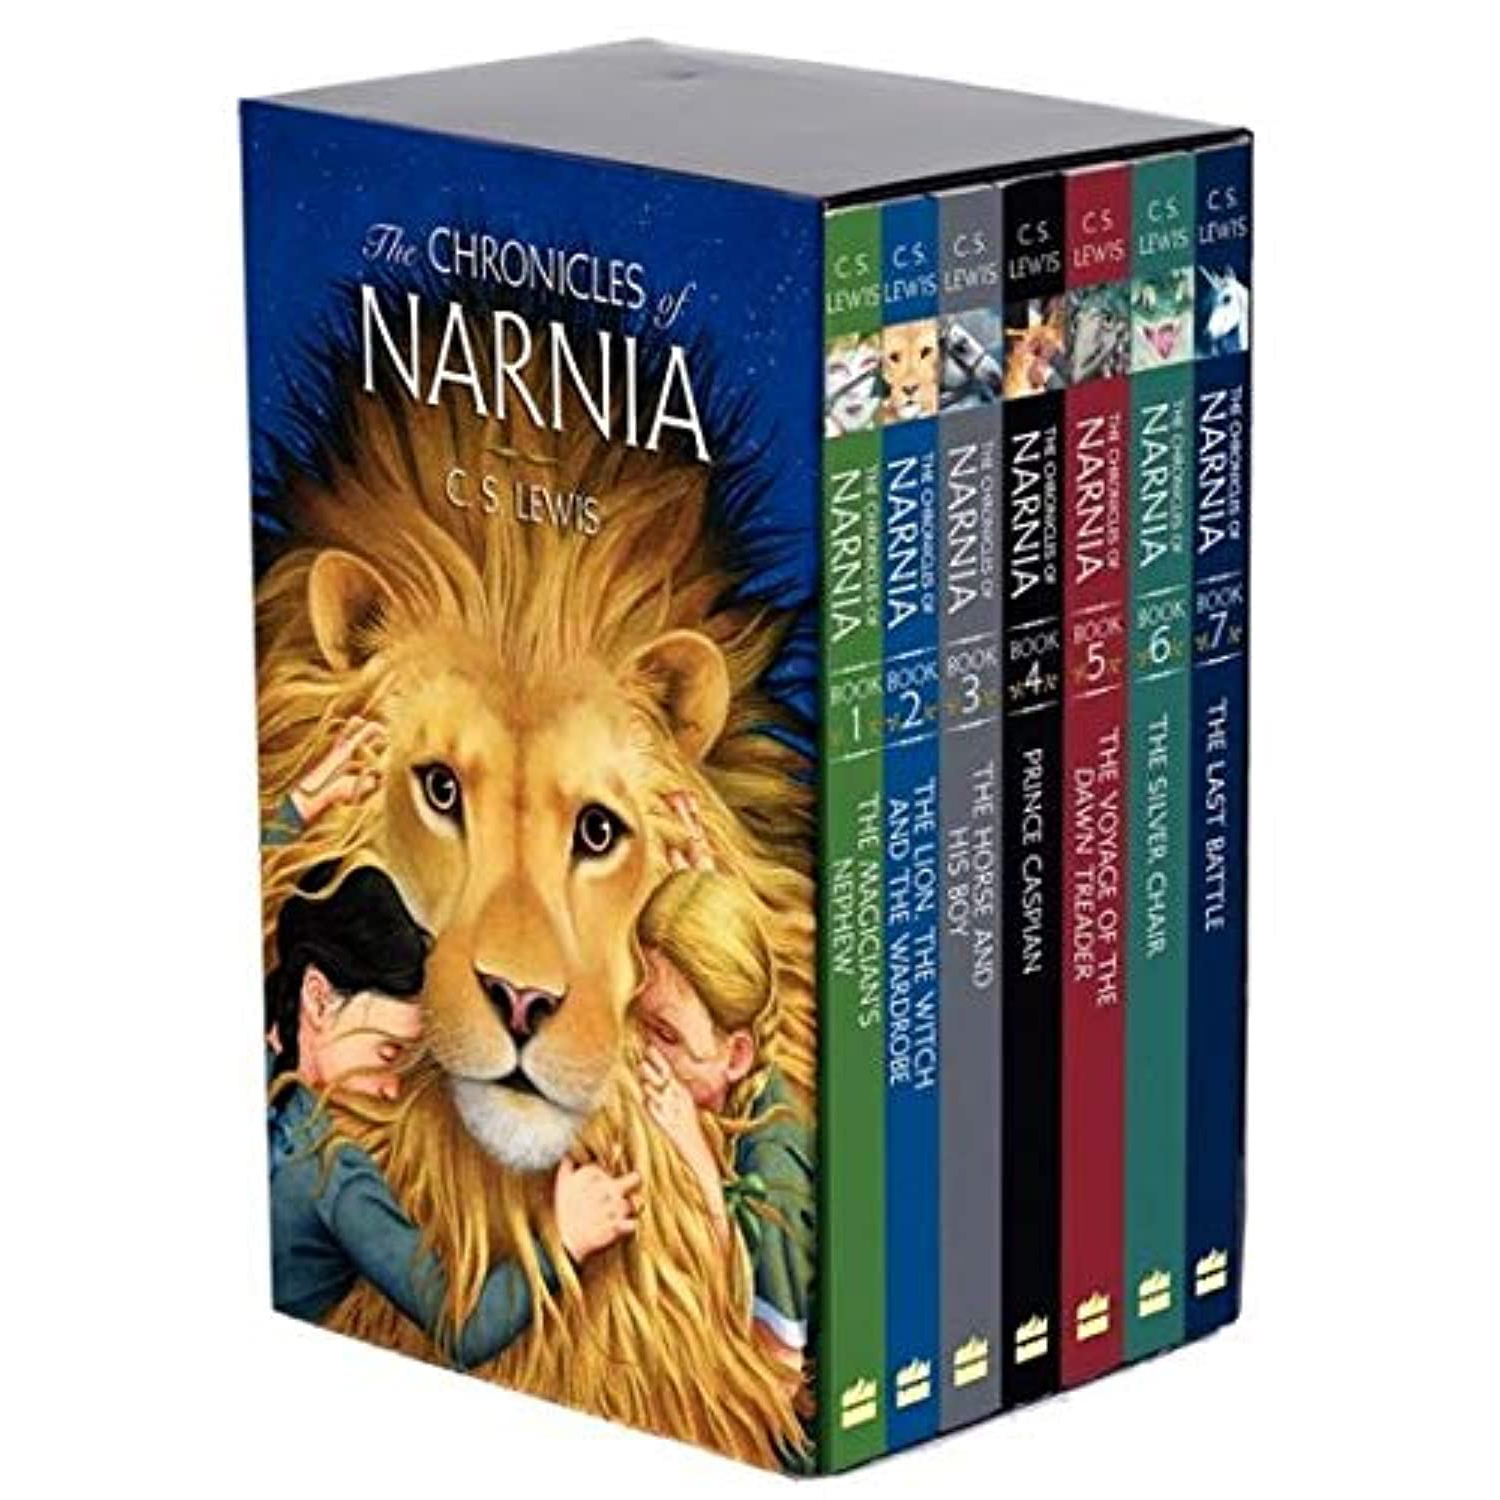 the chronicles of narnia book set